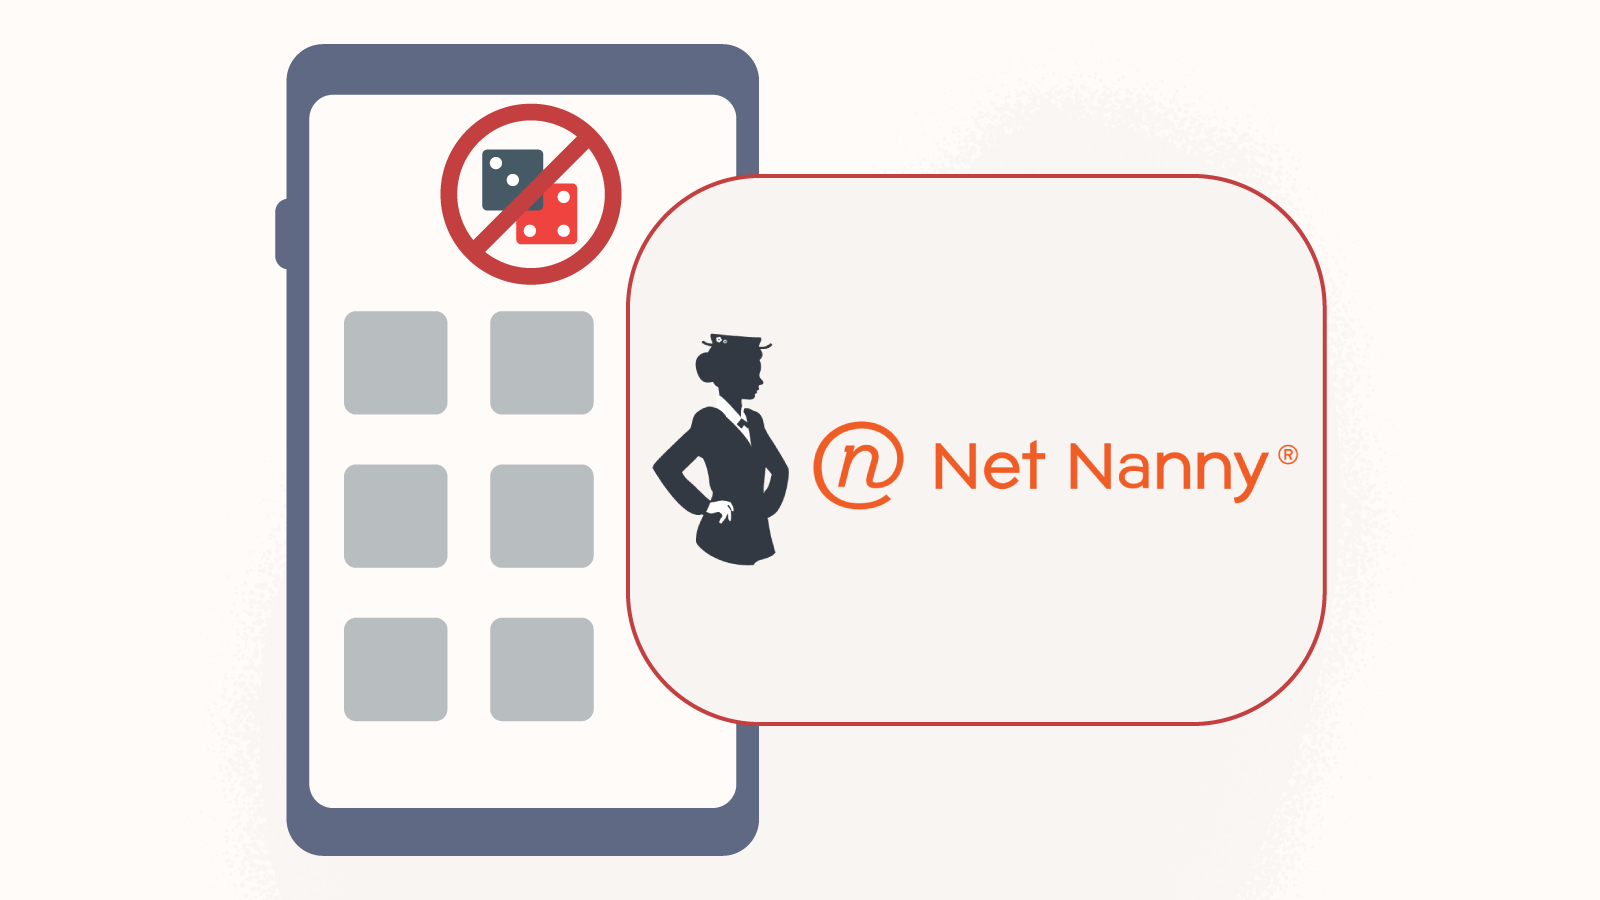 What does Net Nanny offer?